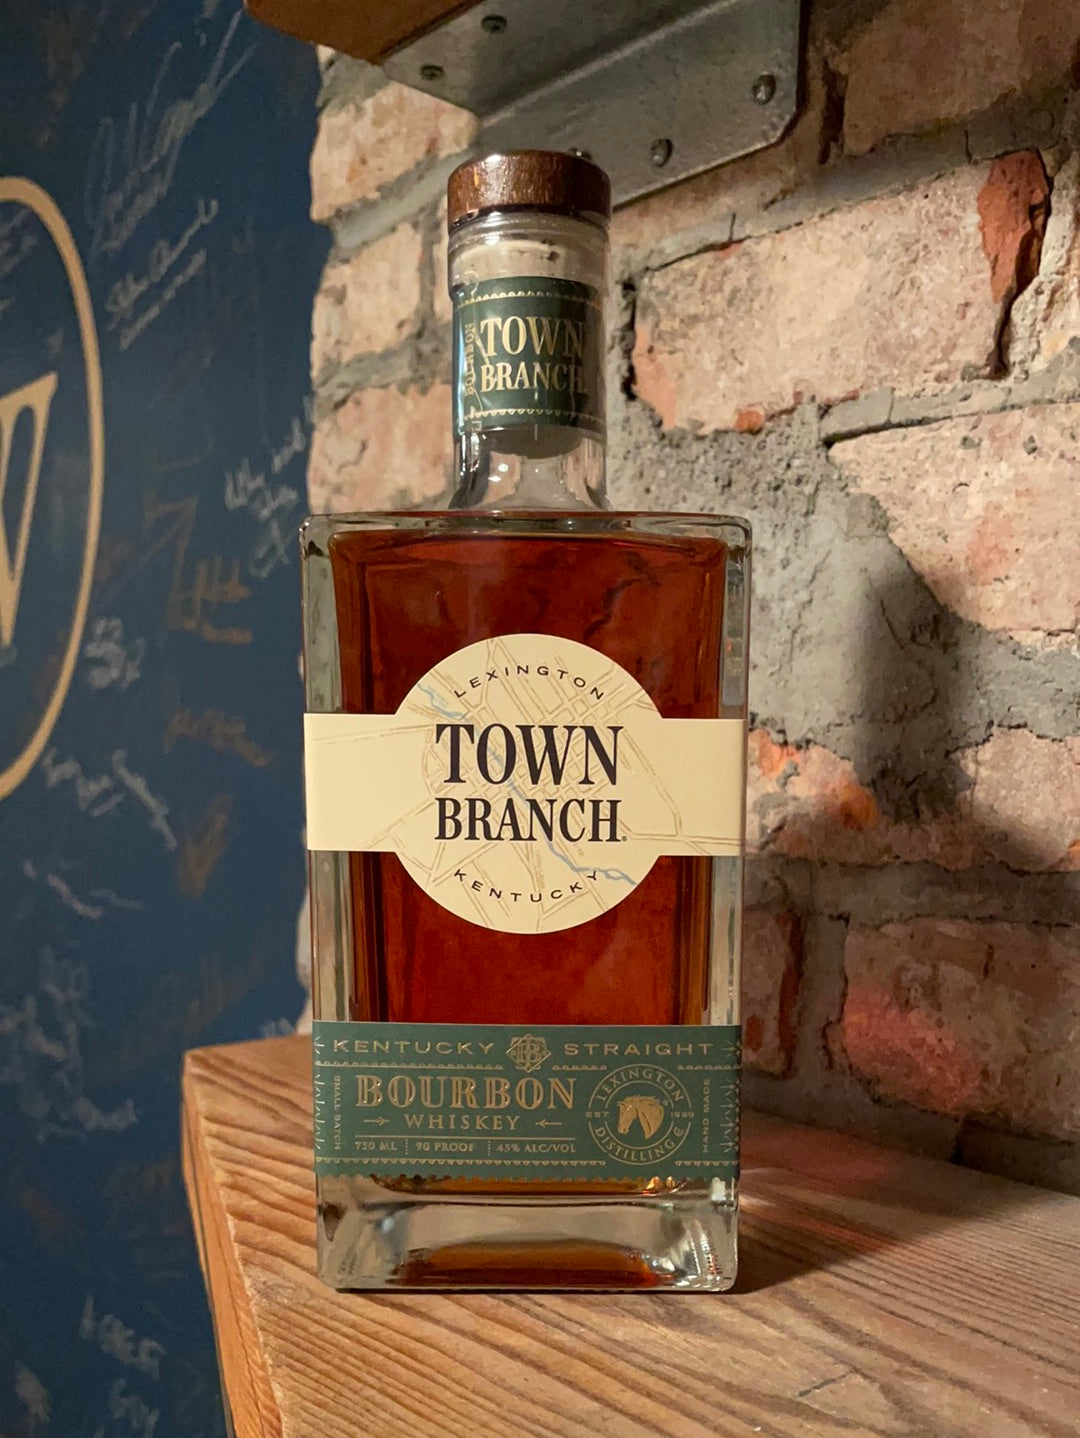 Lexington Distilling "Town Branch" Kentucky Straight Bourbon Whiskey 750ml [NY STATE ONLY]